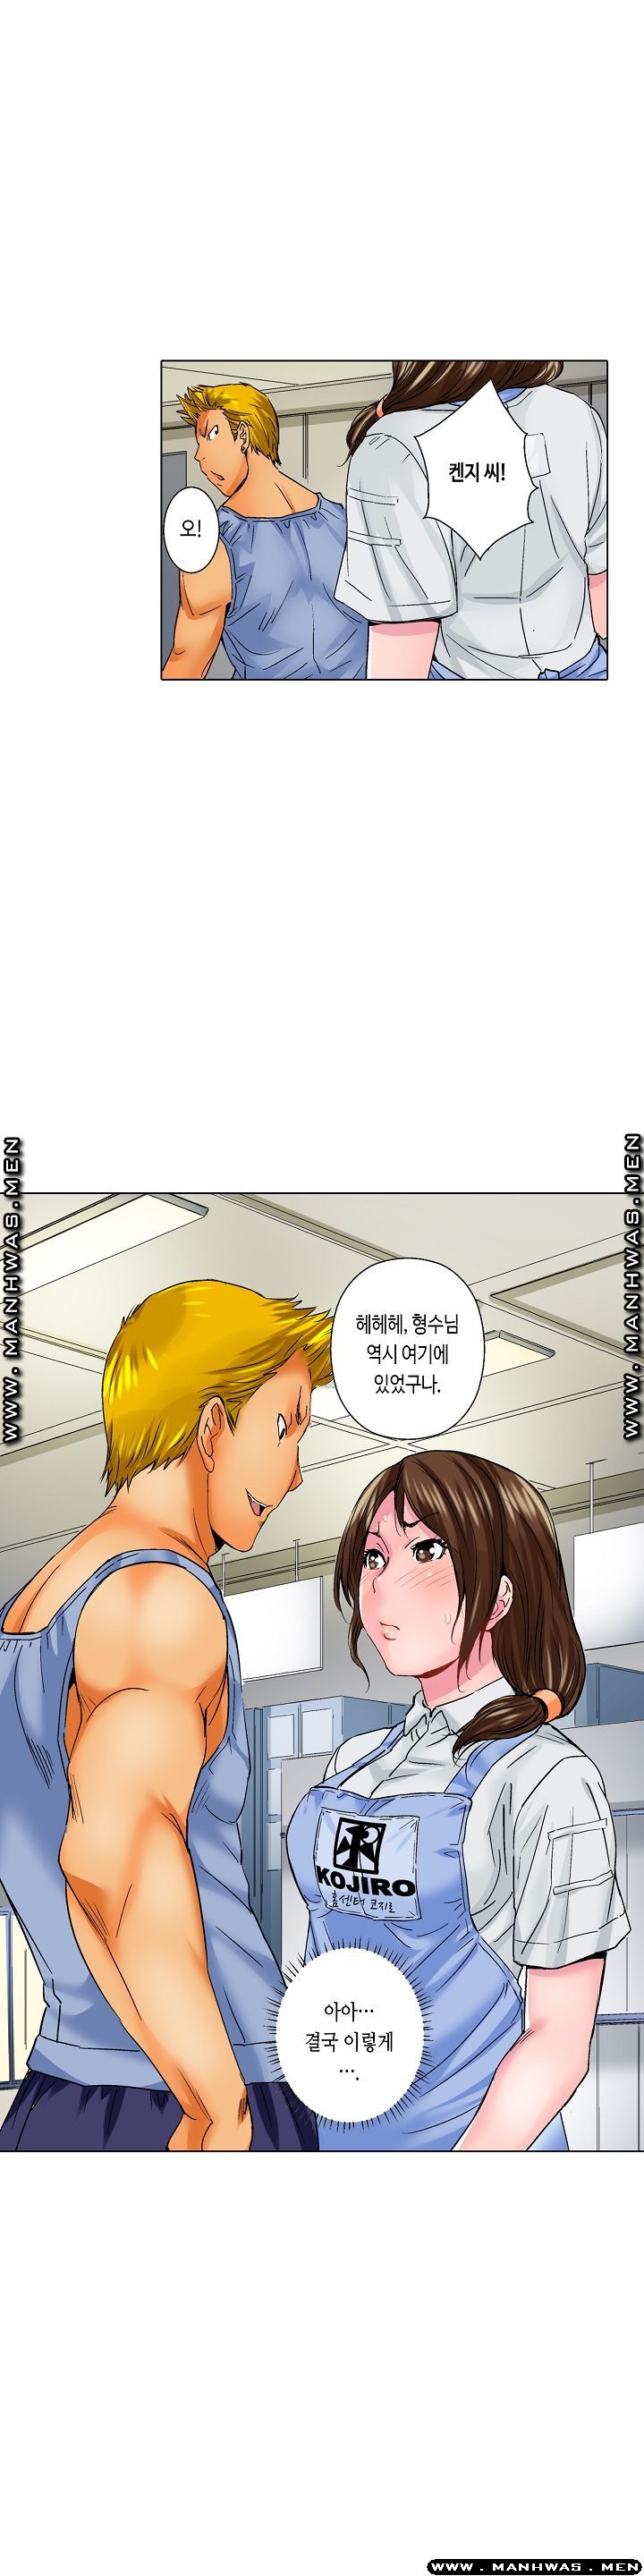 Than Bro Raw - Chapter 10 Page 4